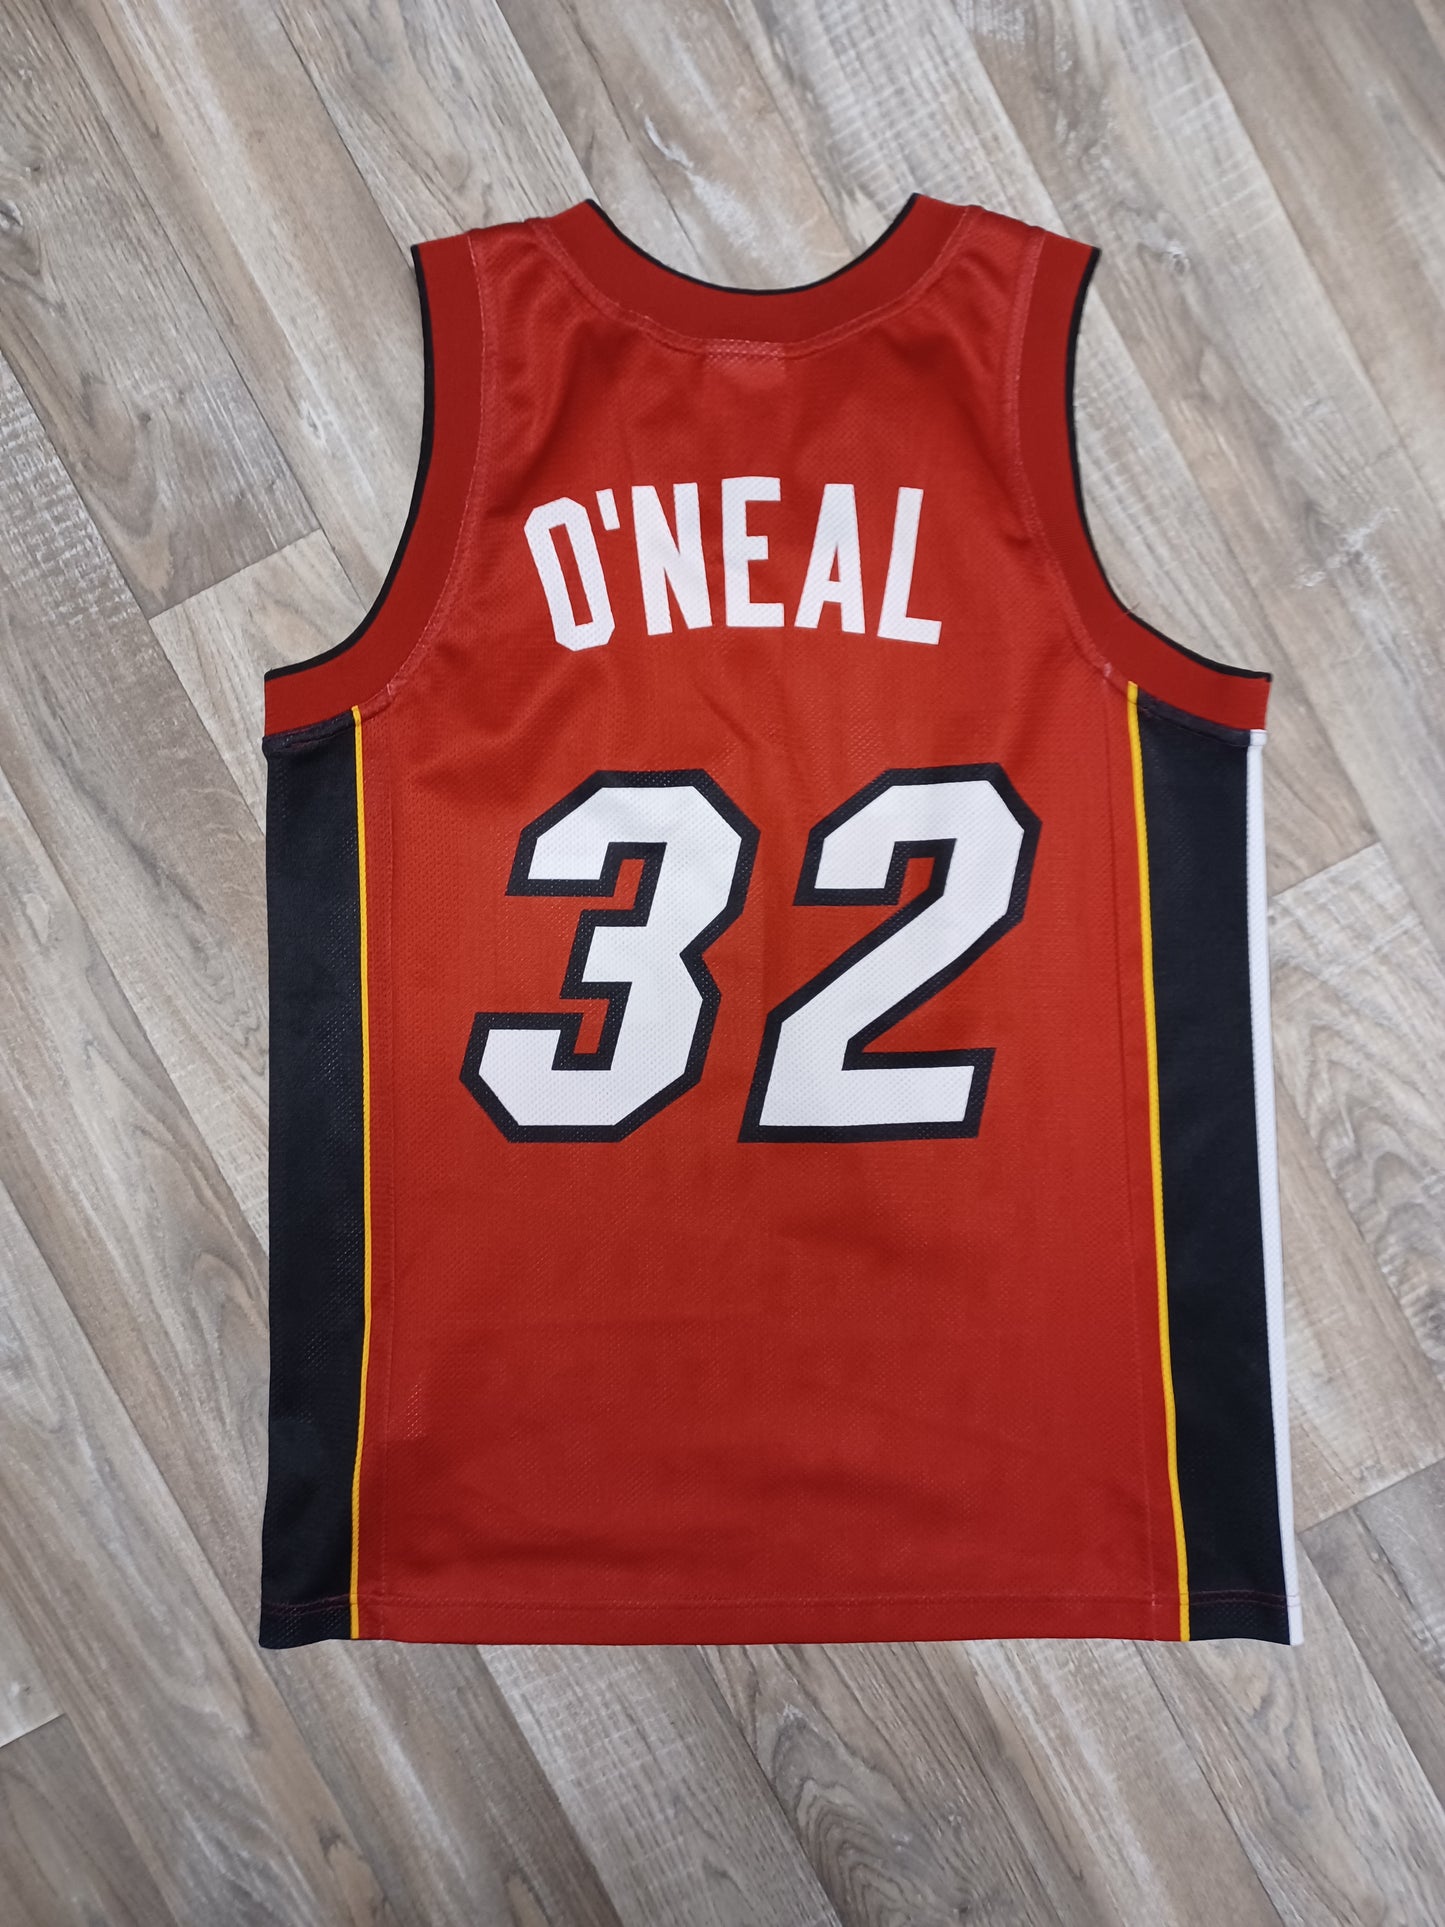 Shaquille O'Neal Miami Heat Jersey Size Small